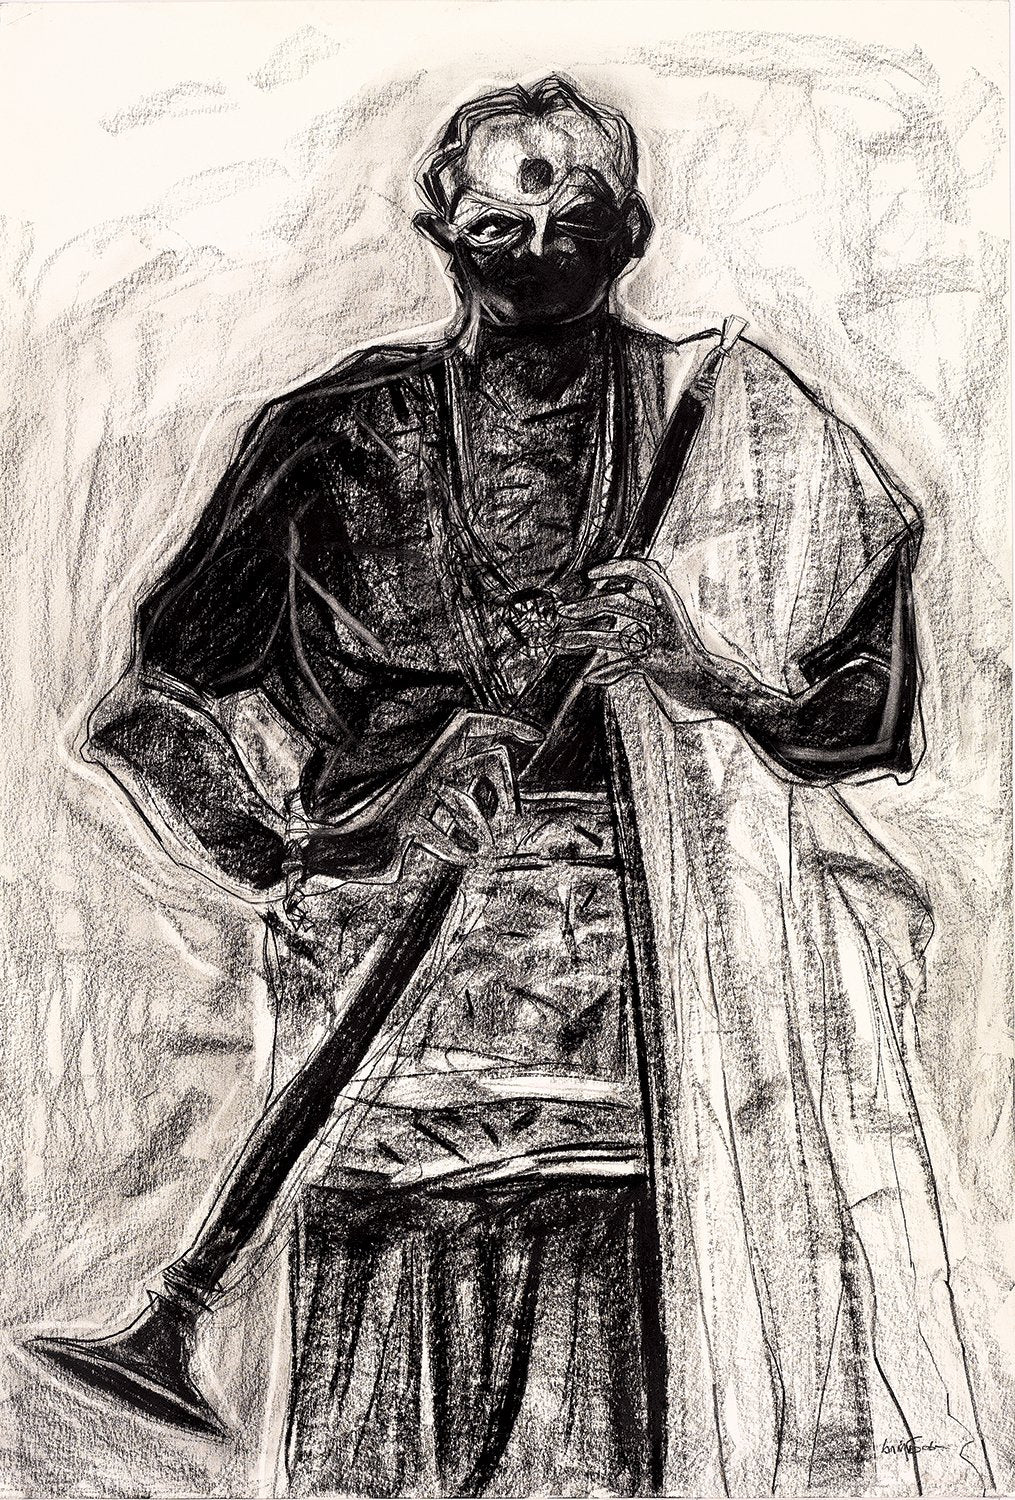 Performer 296|S. Mark Rathinaraj- Charcoal on Board, , 38.5 x 26 inches